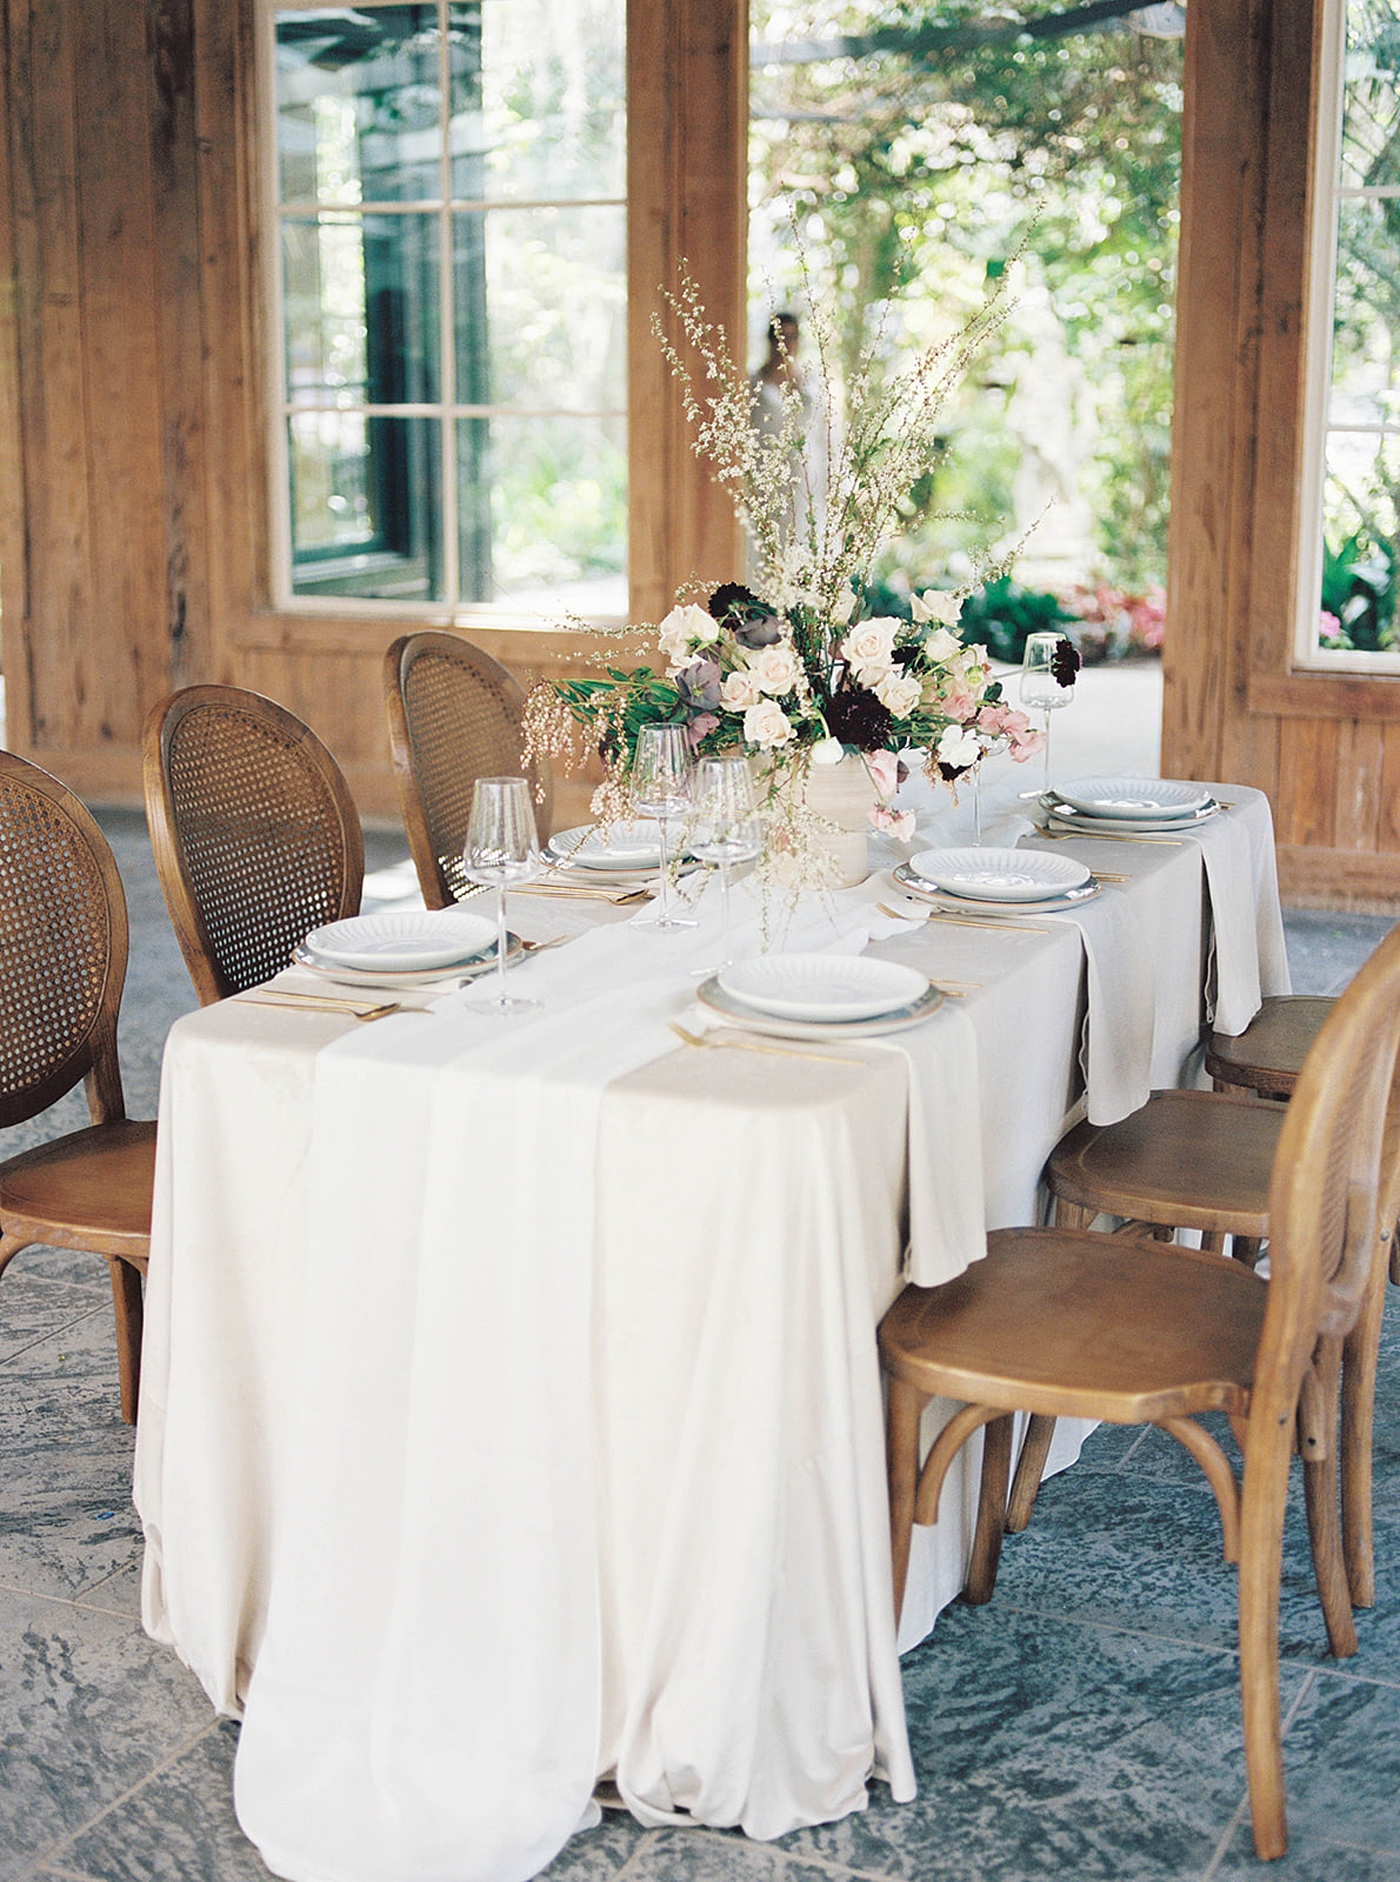 Wedding table with light cream linens and flowers with wooden chairs | Carters Event Co